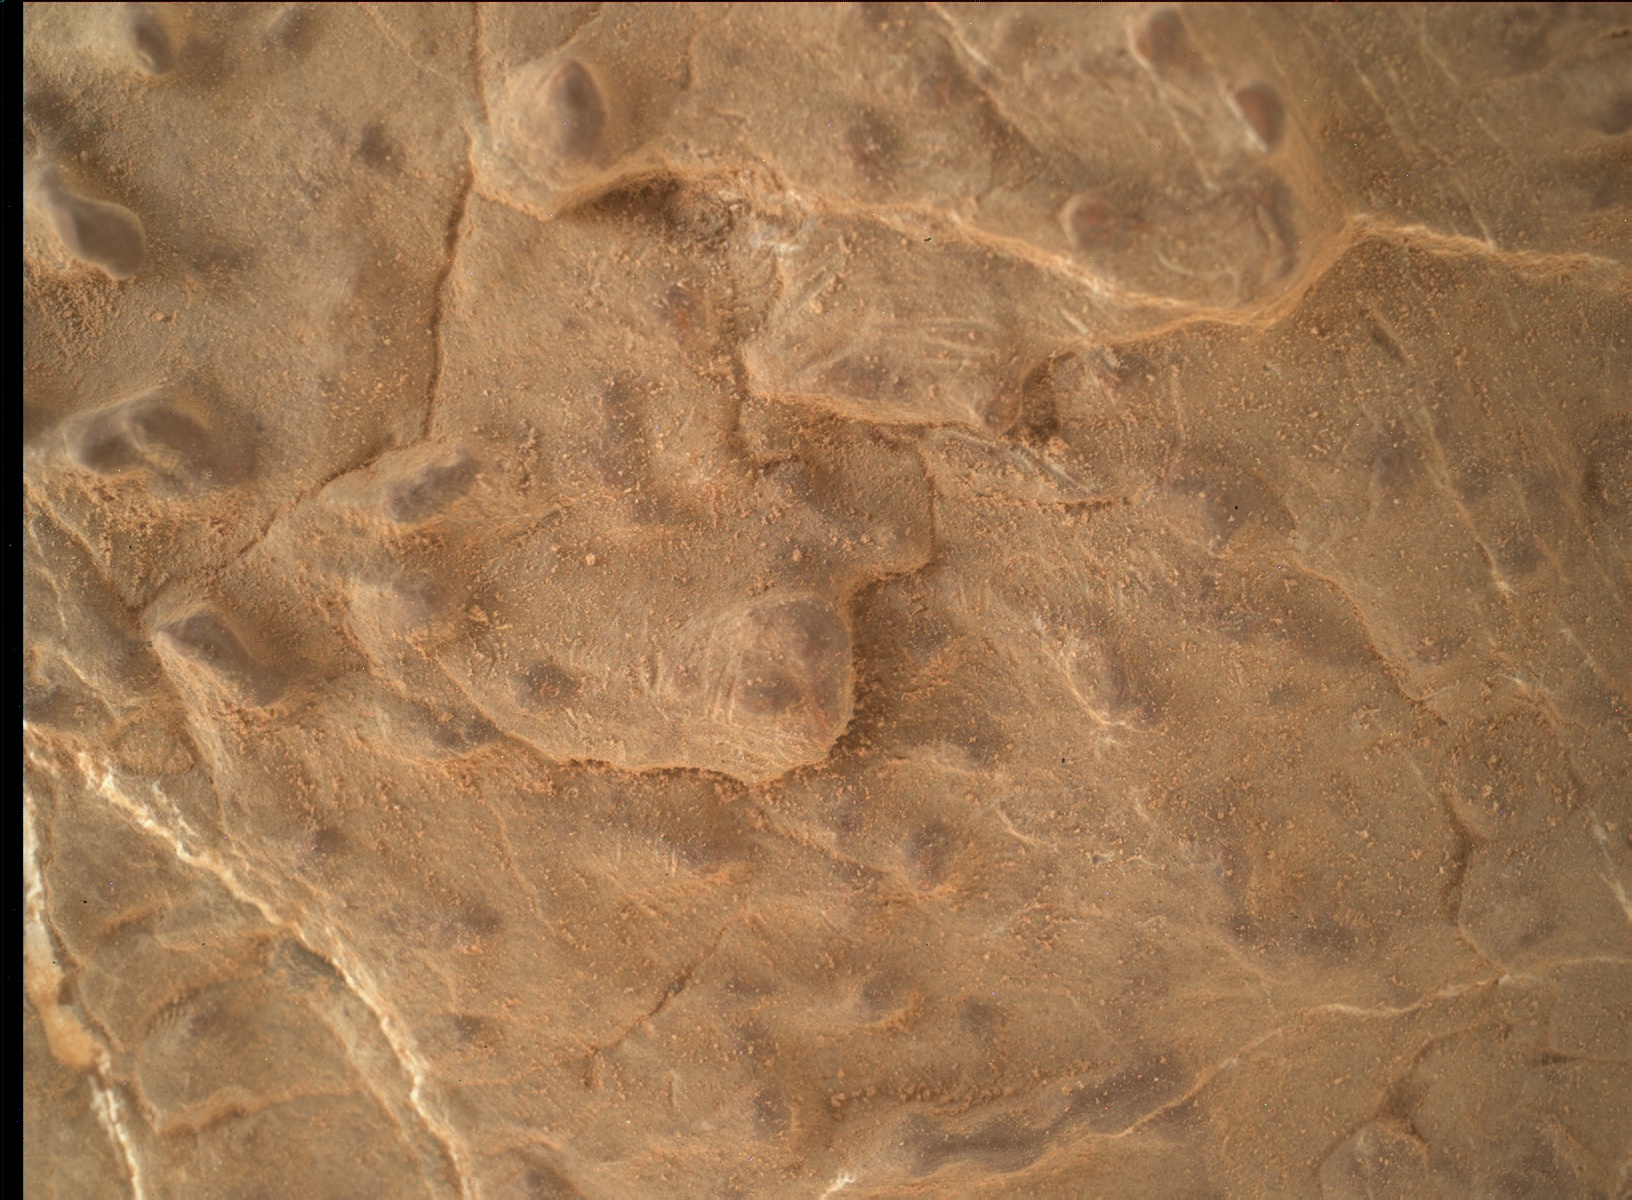 Nasa's Mars rover Curiosity acquired this image using its Mars Hand Lens Imager (MAHLI) on Sol 3034